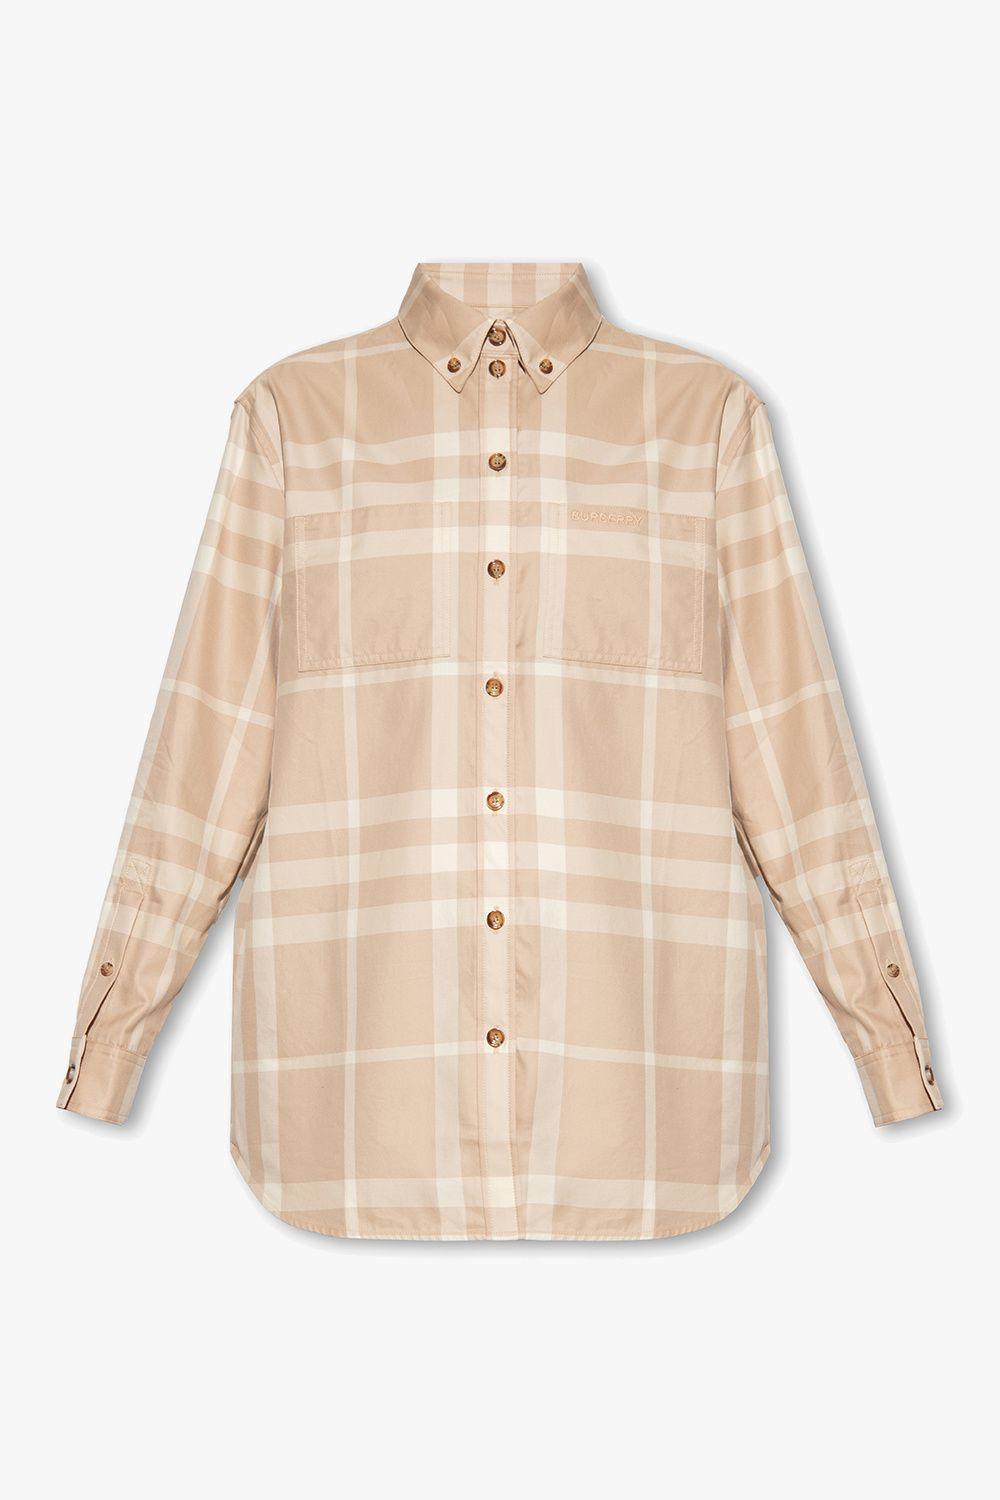 Burberry 'ivanna' Shirt in Natural | Lyst